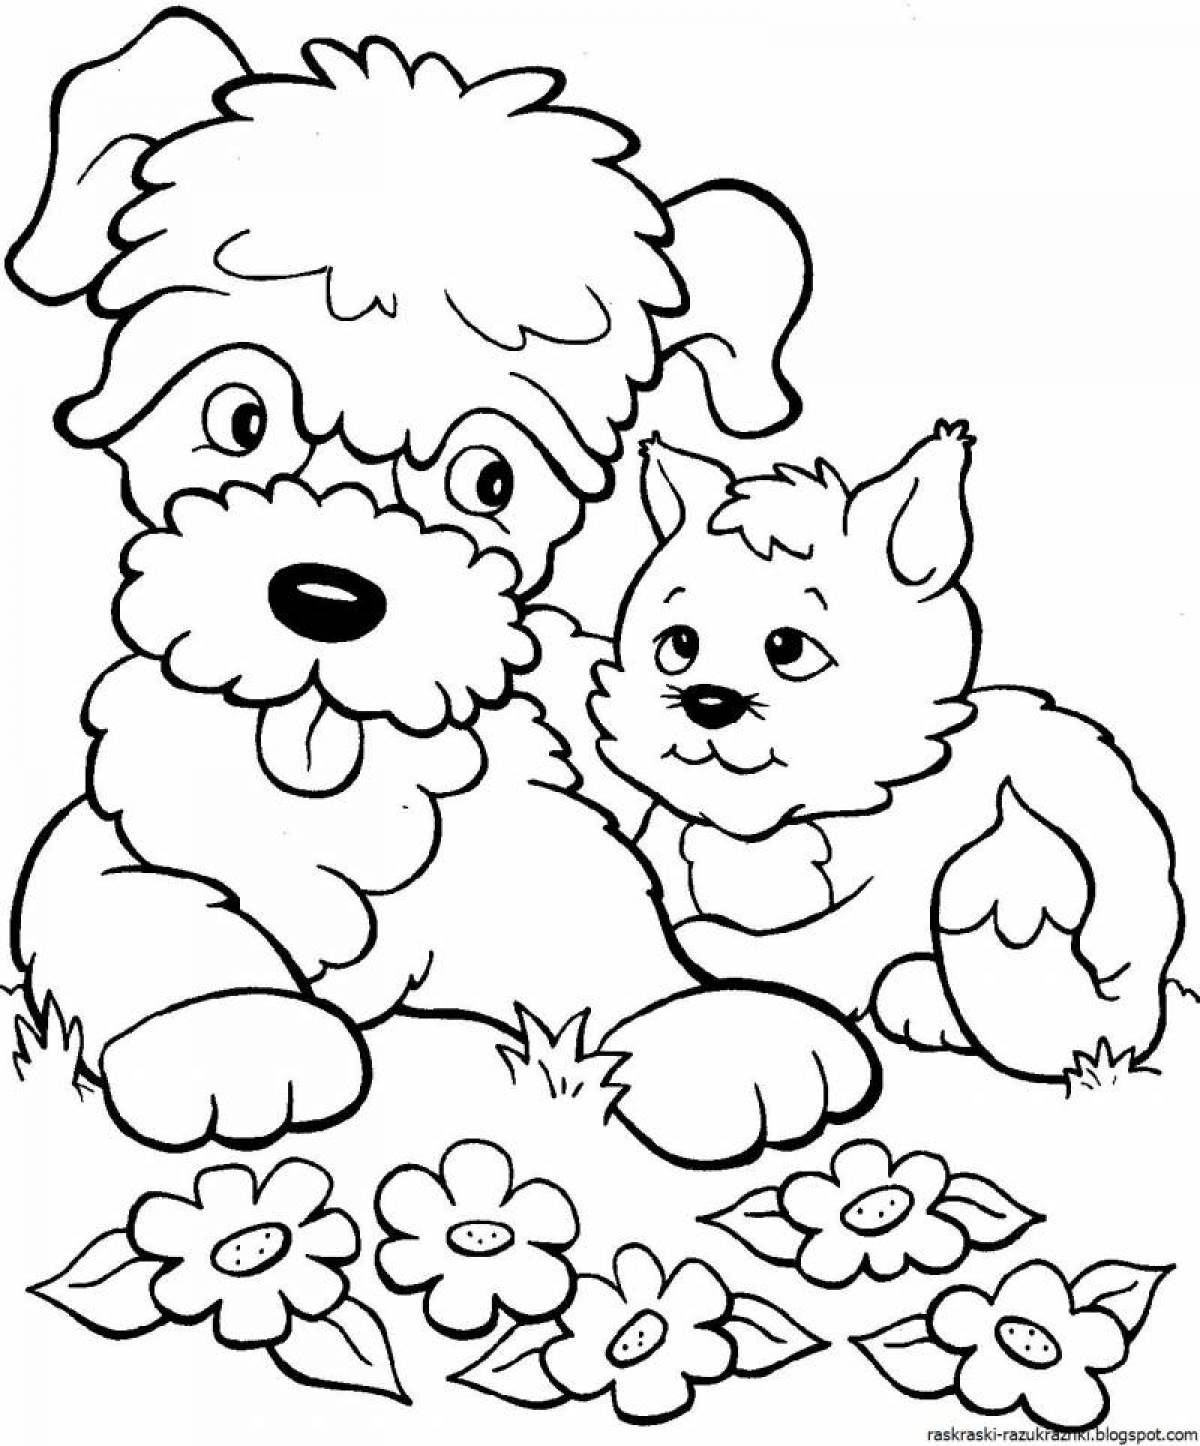 Sweet-nosed dog coloring pages for kids